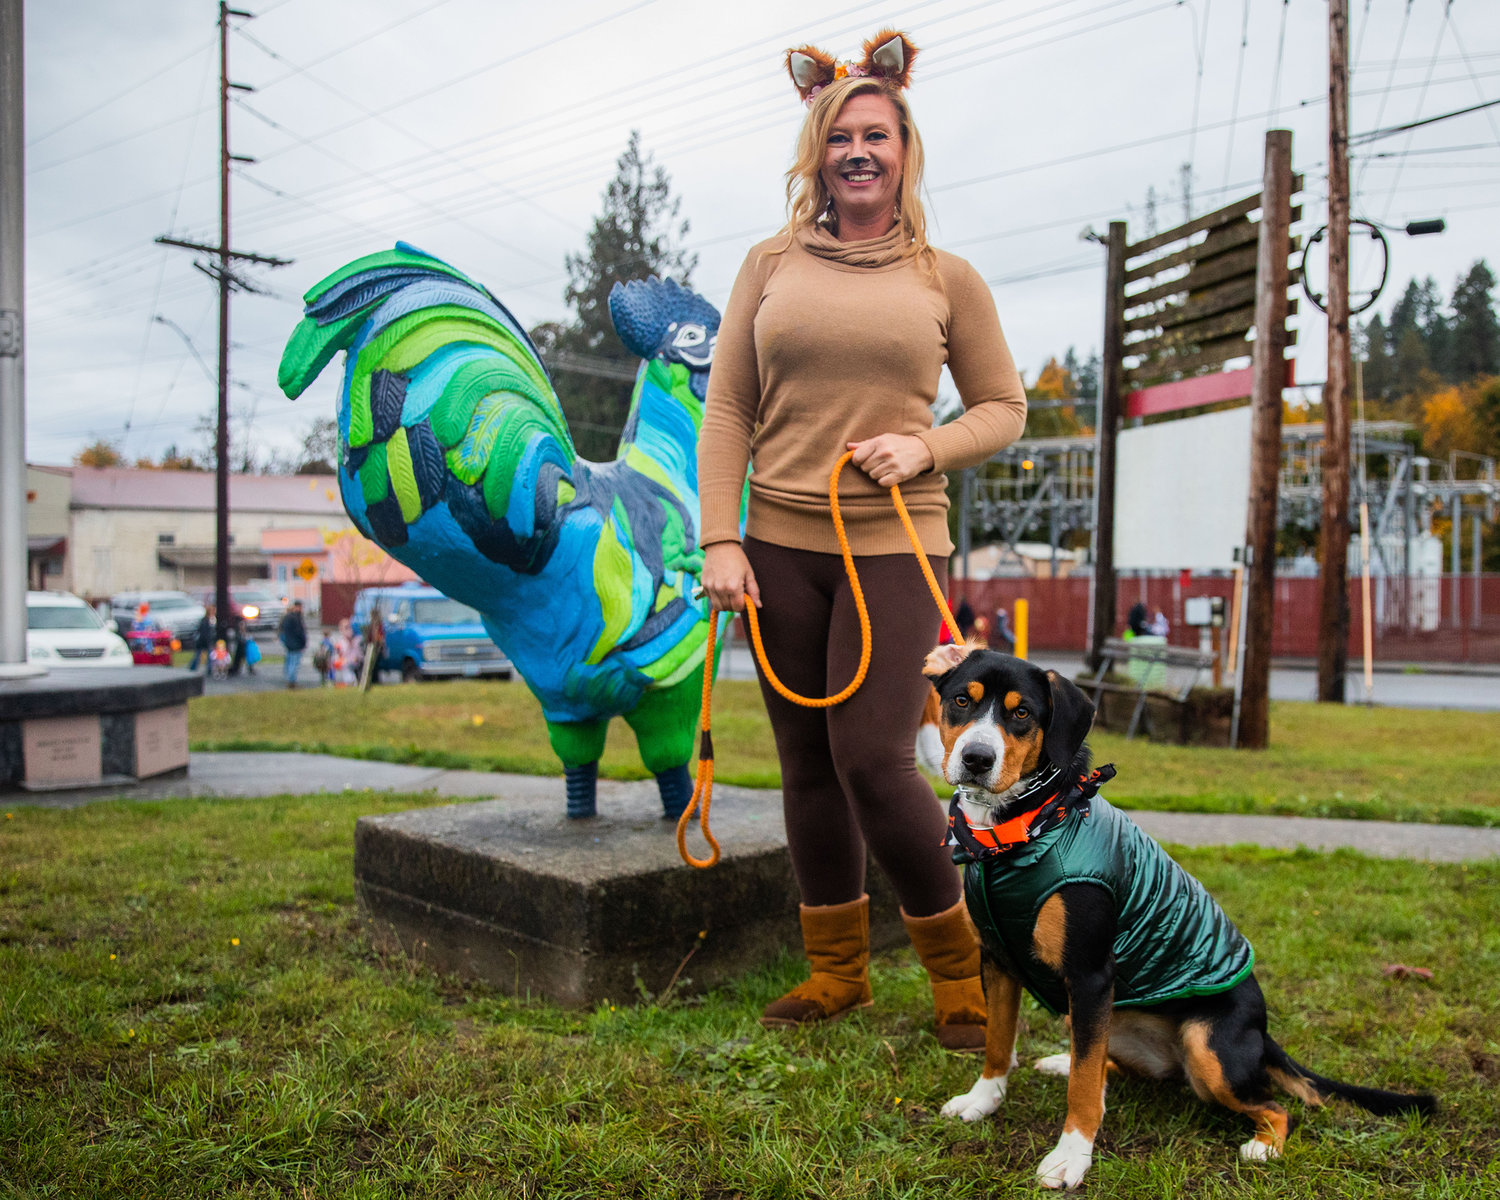 Robin Brumley, owner of the Winlock Dance Center, smiles for a photo with her dog Charlie during Egg-O-Lantern festivities on Halloween.